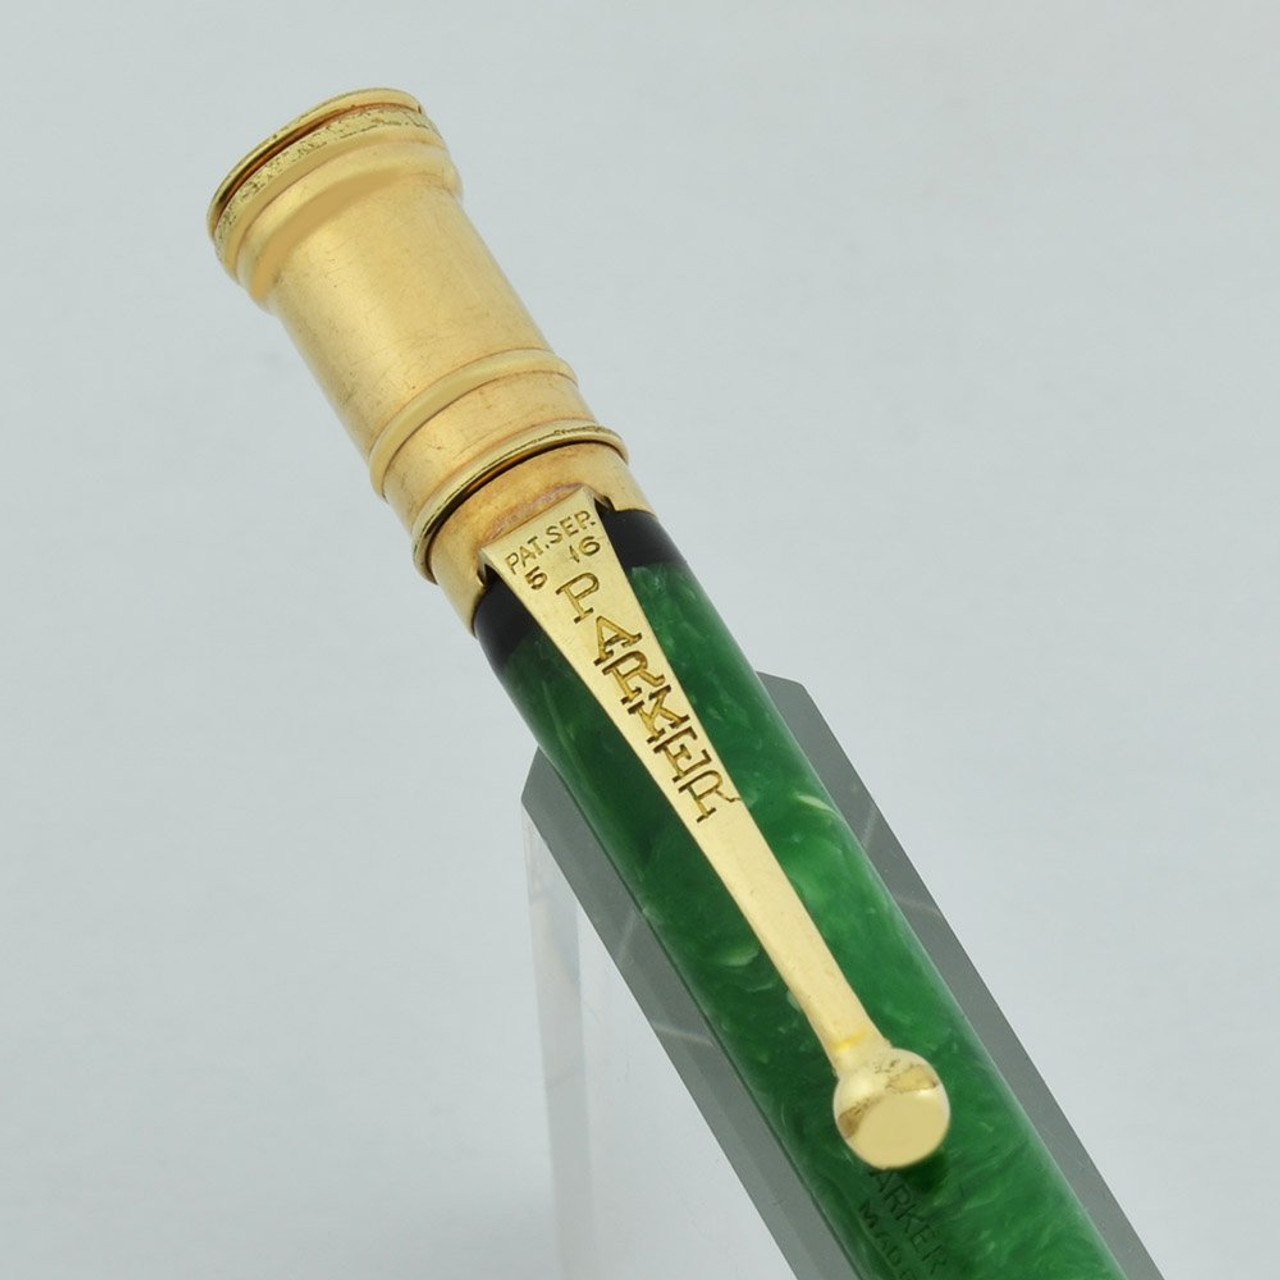 Parker Duofold Junior Pencil, 1930's - Jade Green w Black Bands  (Very Nice, Works Well)